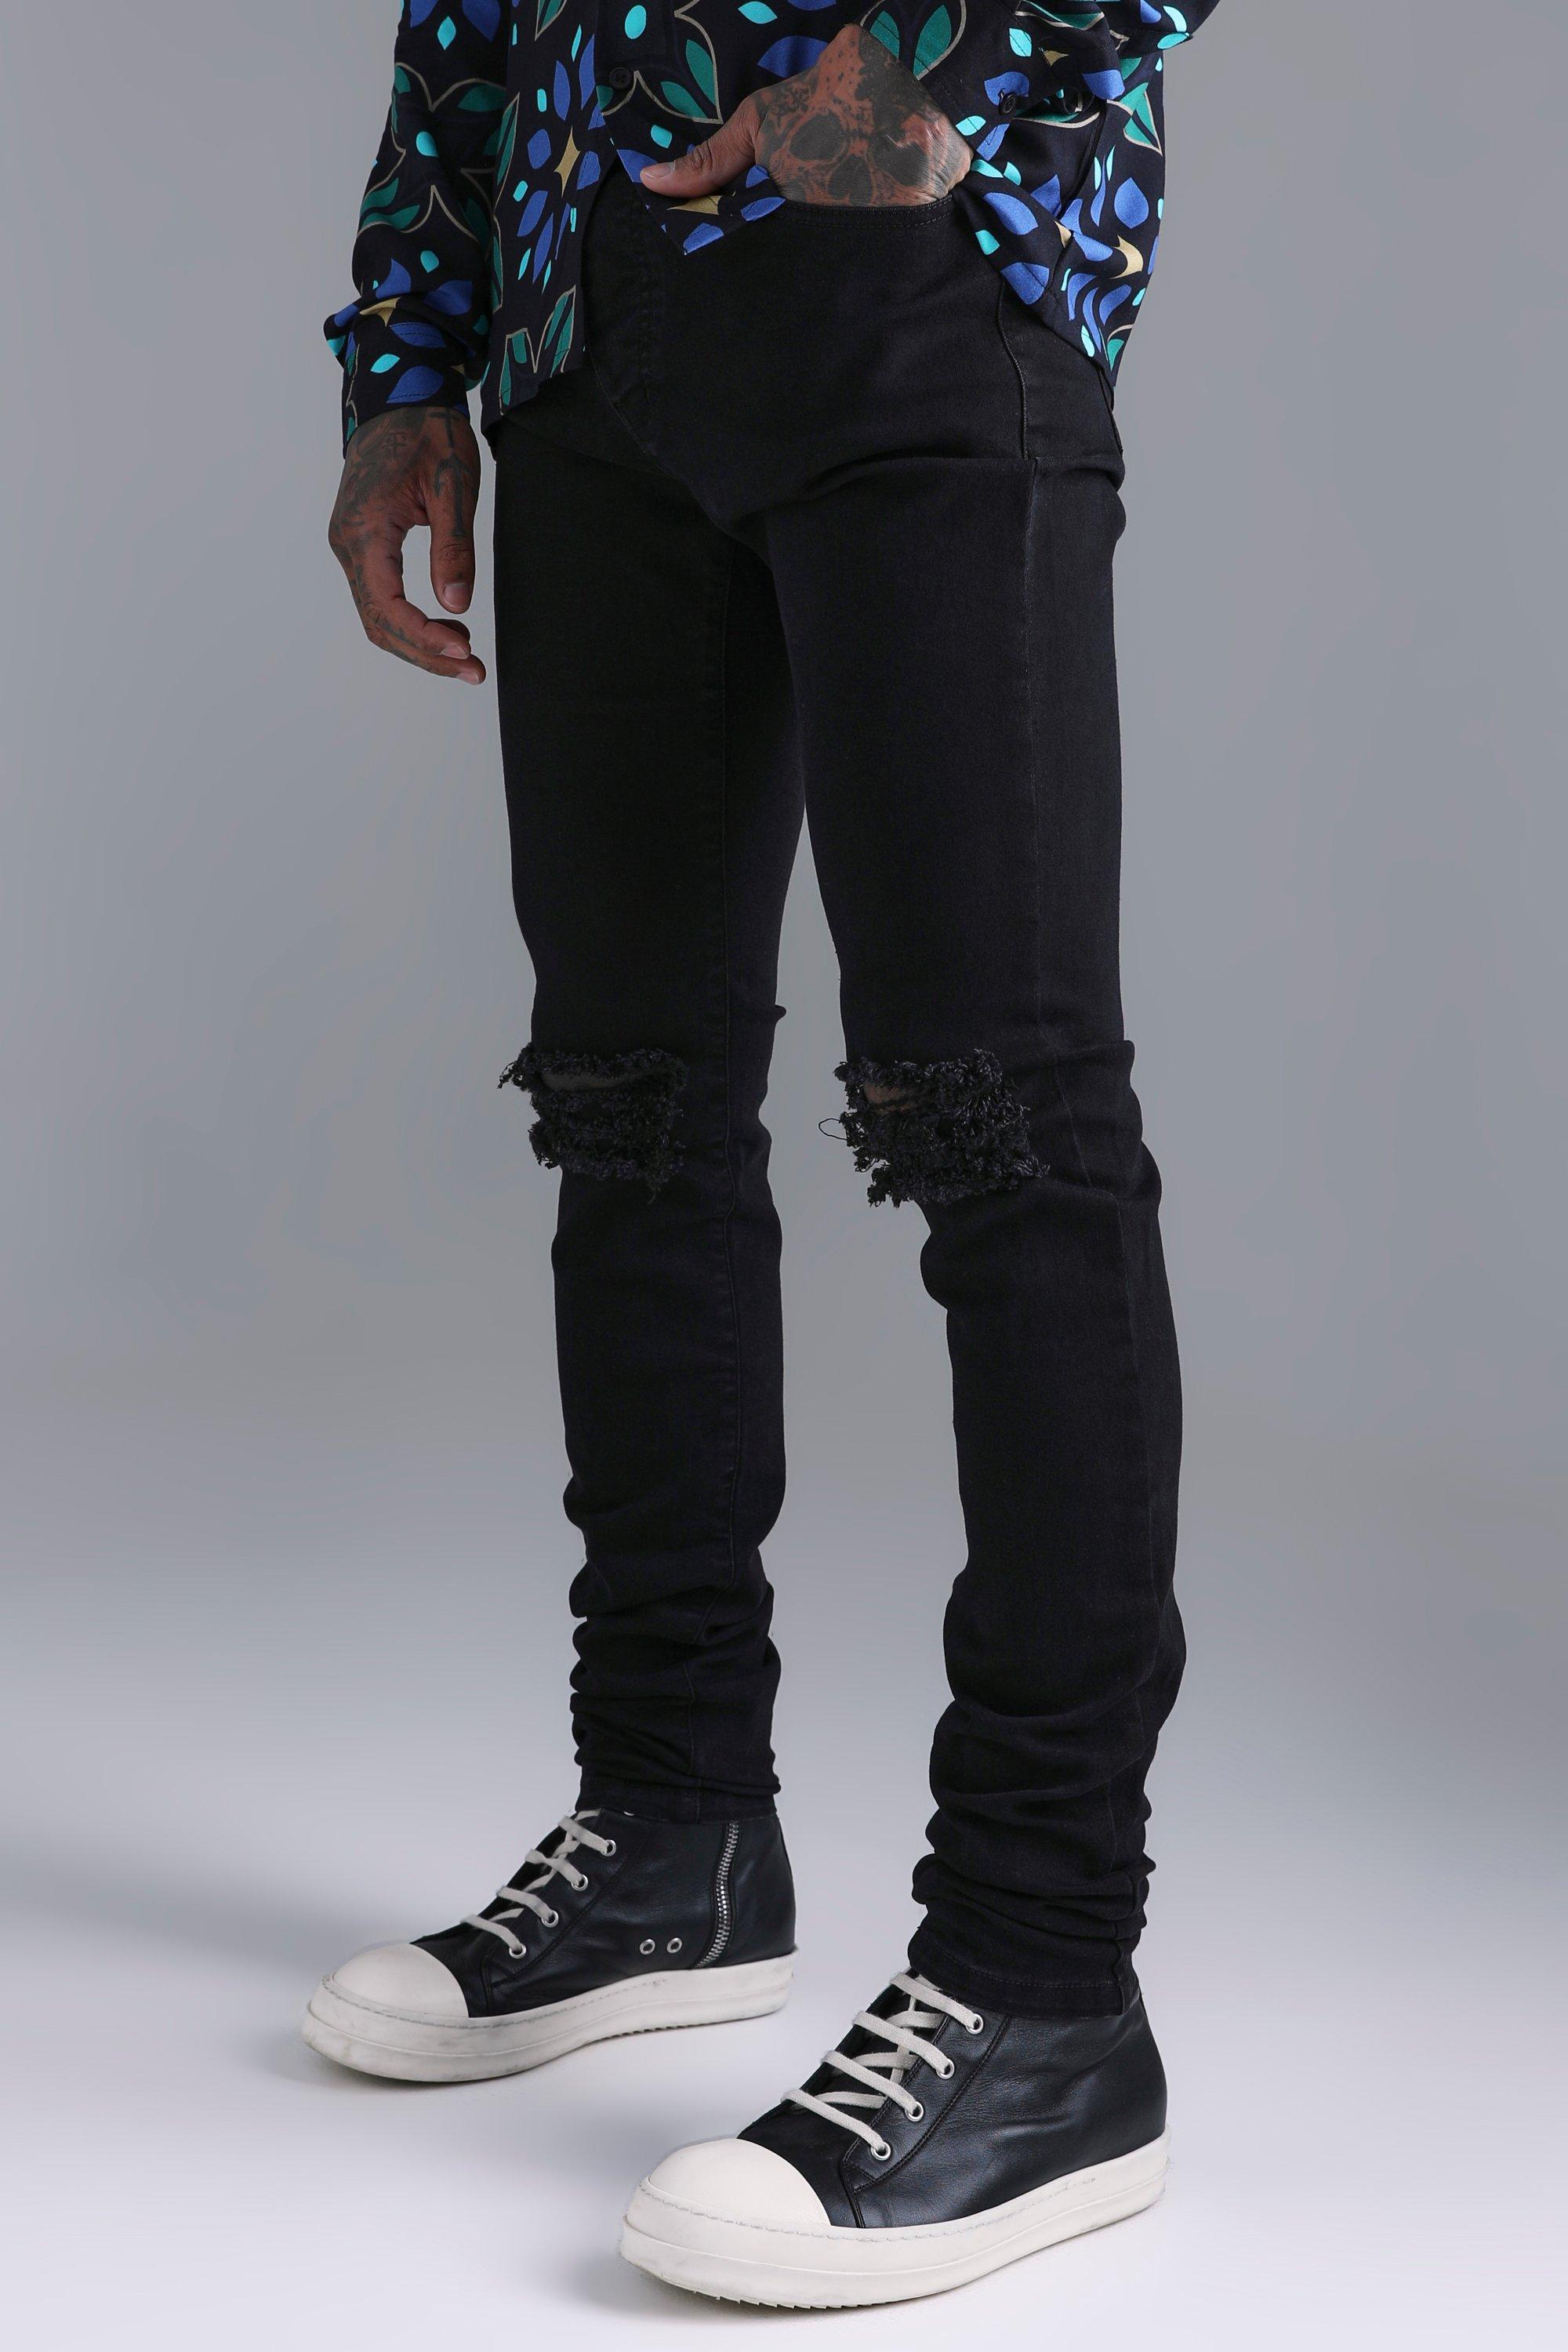 Mens Black Skinny Stretch Stacked Ripped Knee Jeans, Black